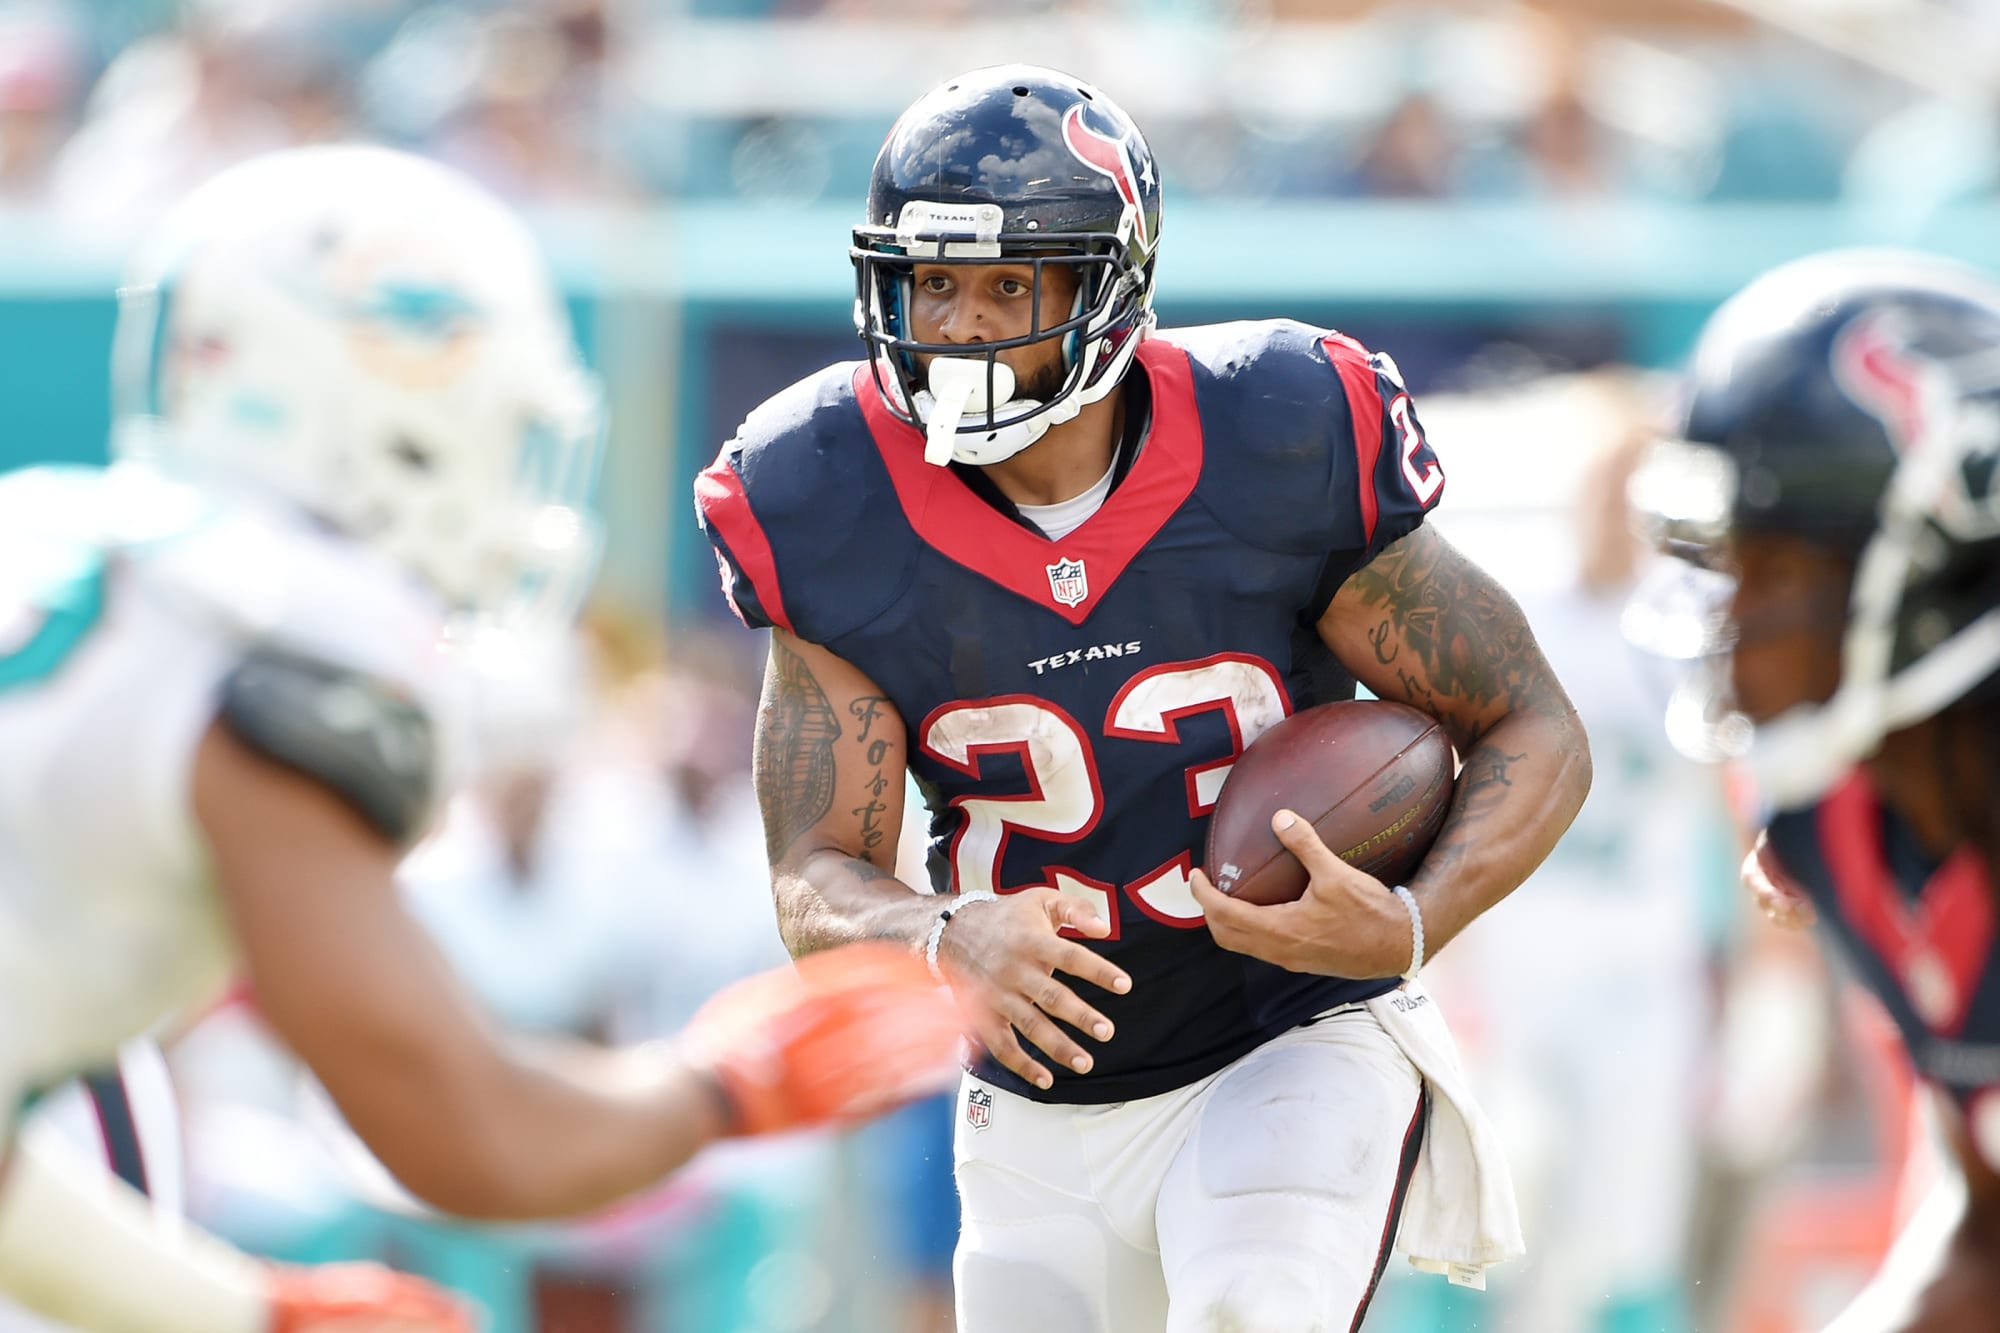 Funniest memes trolling former RB Arian Foster fueling the NFL rigged conspiracy